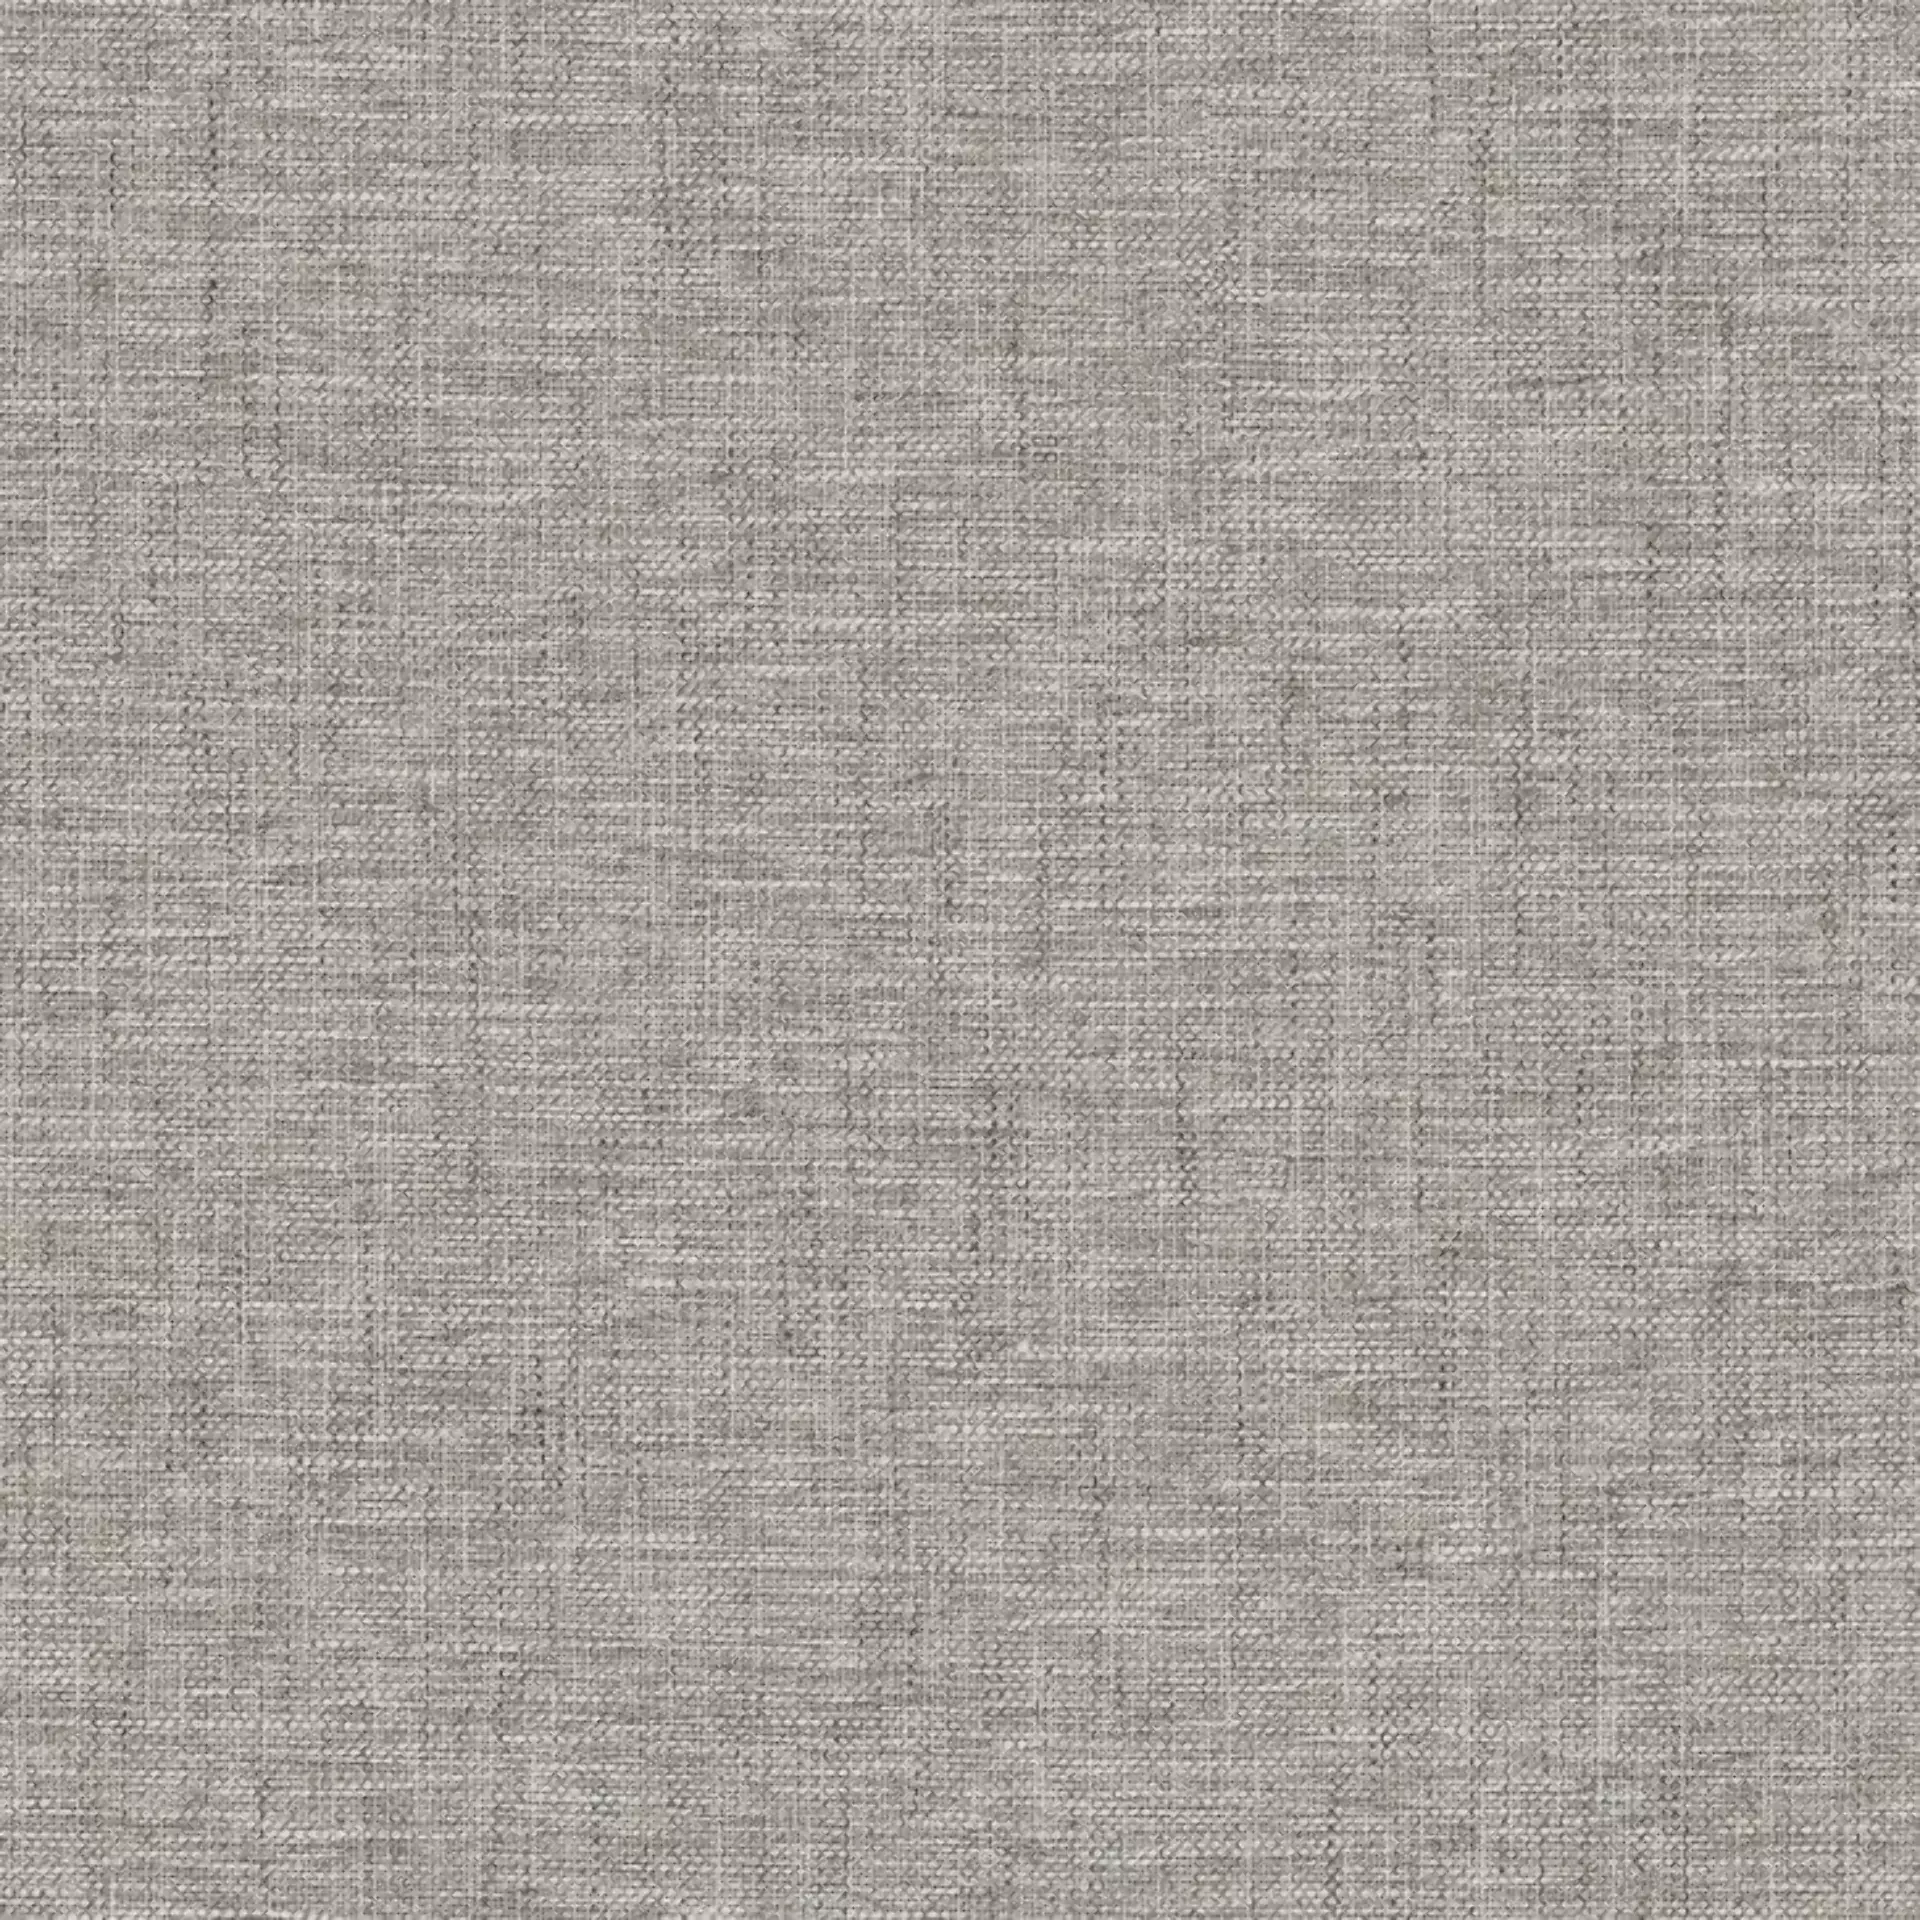 Sant Agostino Fineart Grey Natural CSAFI7GR60 60x60cm rectified 10mm